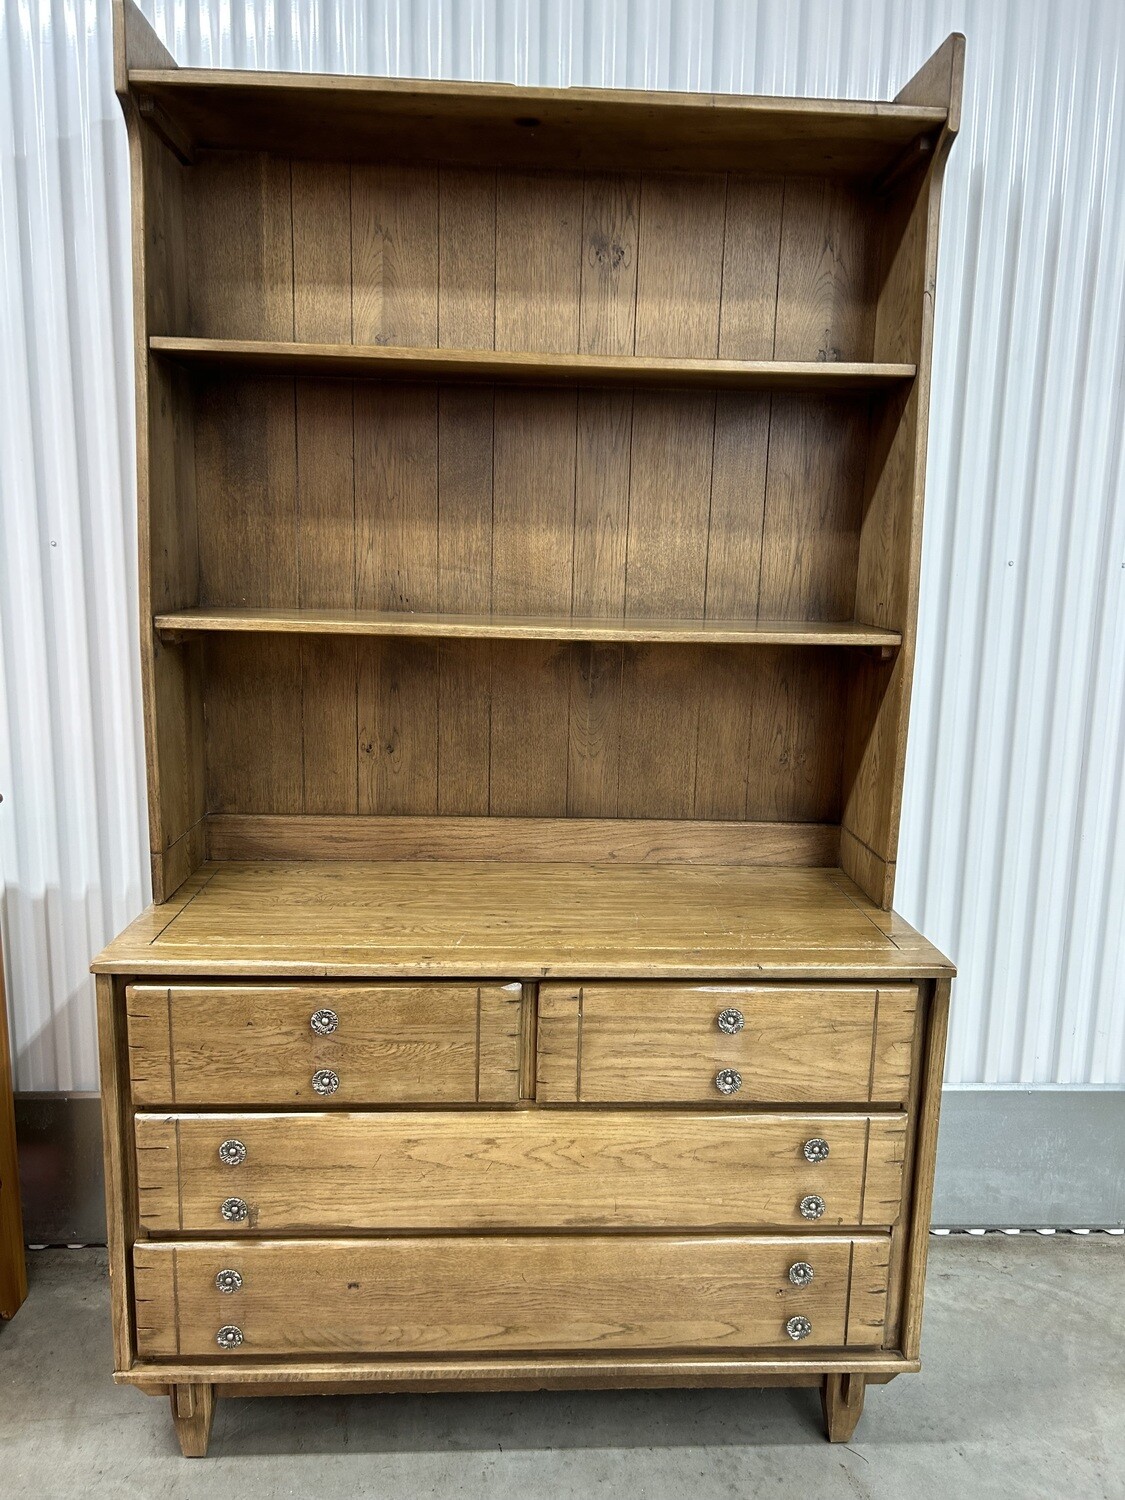 Rustic Wood Dresser w/bookcase hutch #2133 ** 5 MOS. TO SELL, REDUCED